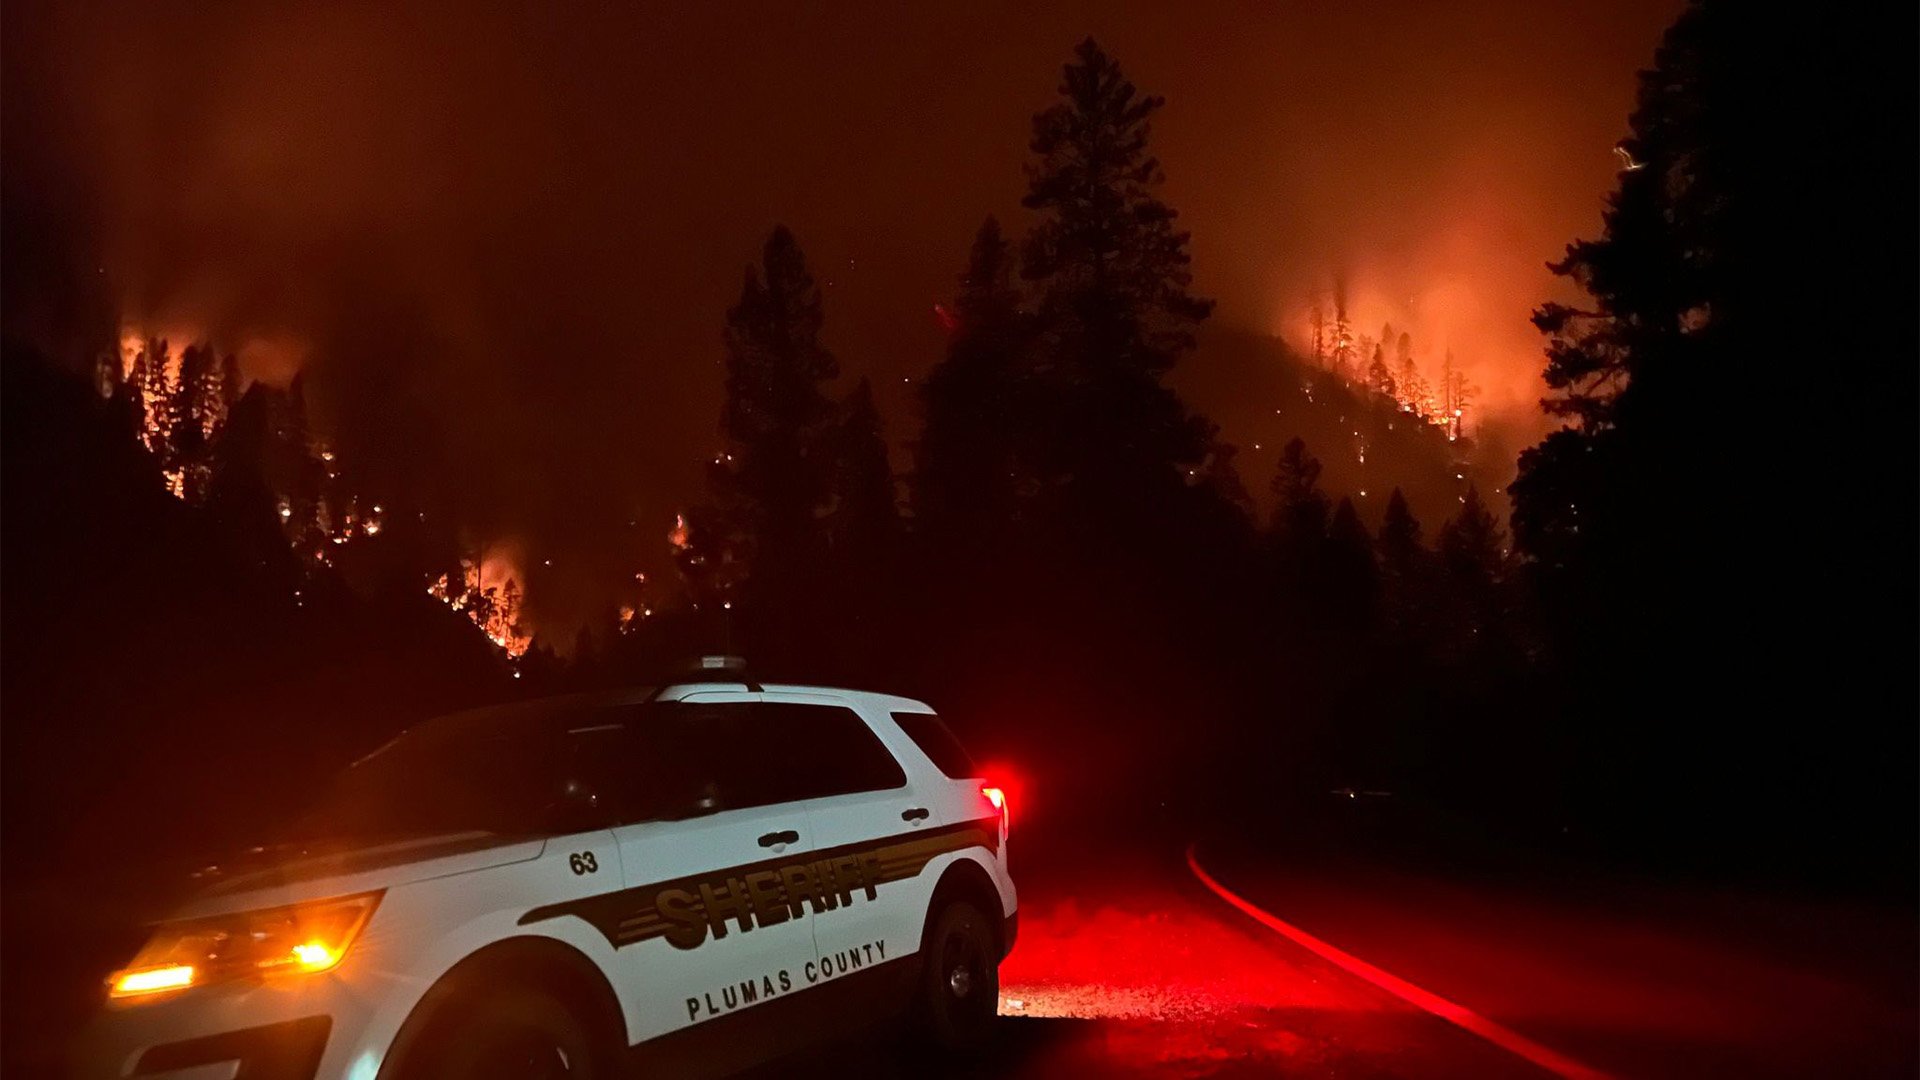 Multiple law enforcement agencies, fire crews, and other first responders pitched it to concentrate on evacuation efforts while the McKinney Fire raged on Aug. 3, 2022, in California's Siskiyou County. Siskiyou County Sheriff’s Office photo.